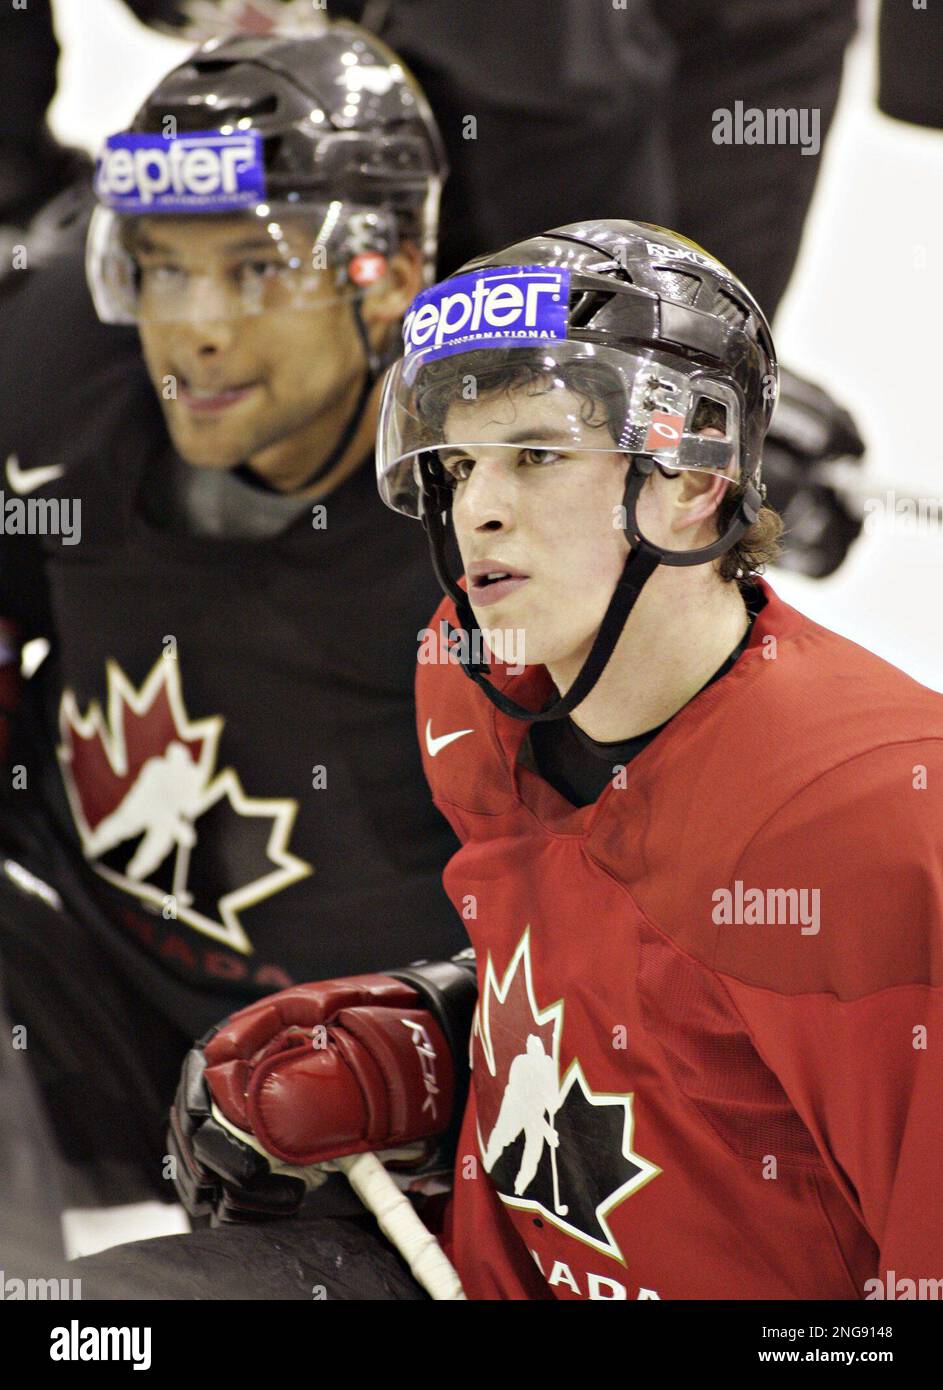 Team Canada's Sidney Crosby, right, congratulates teammate Patrice Bergeron  who scored Canada's fourth goal in the first period against Latvia at the  IIHF World Hockey Championship, Thursday, May 11, 2006, in Riga